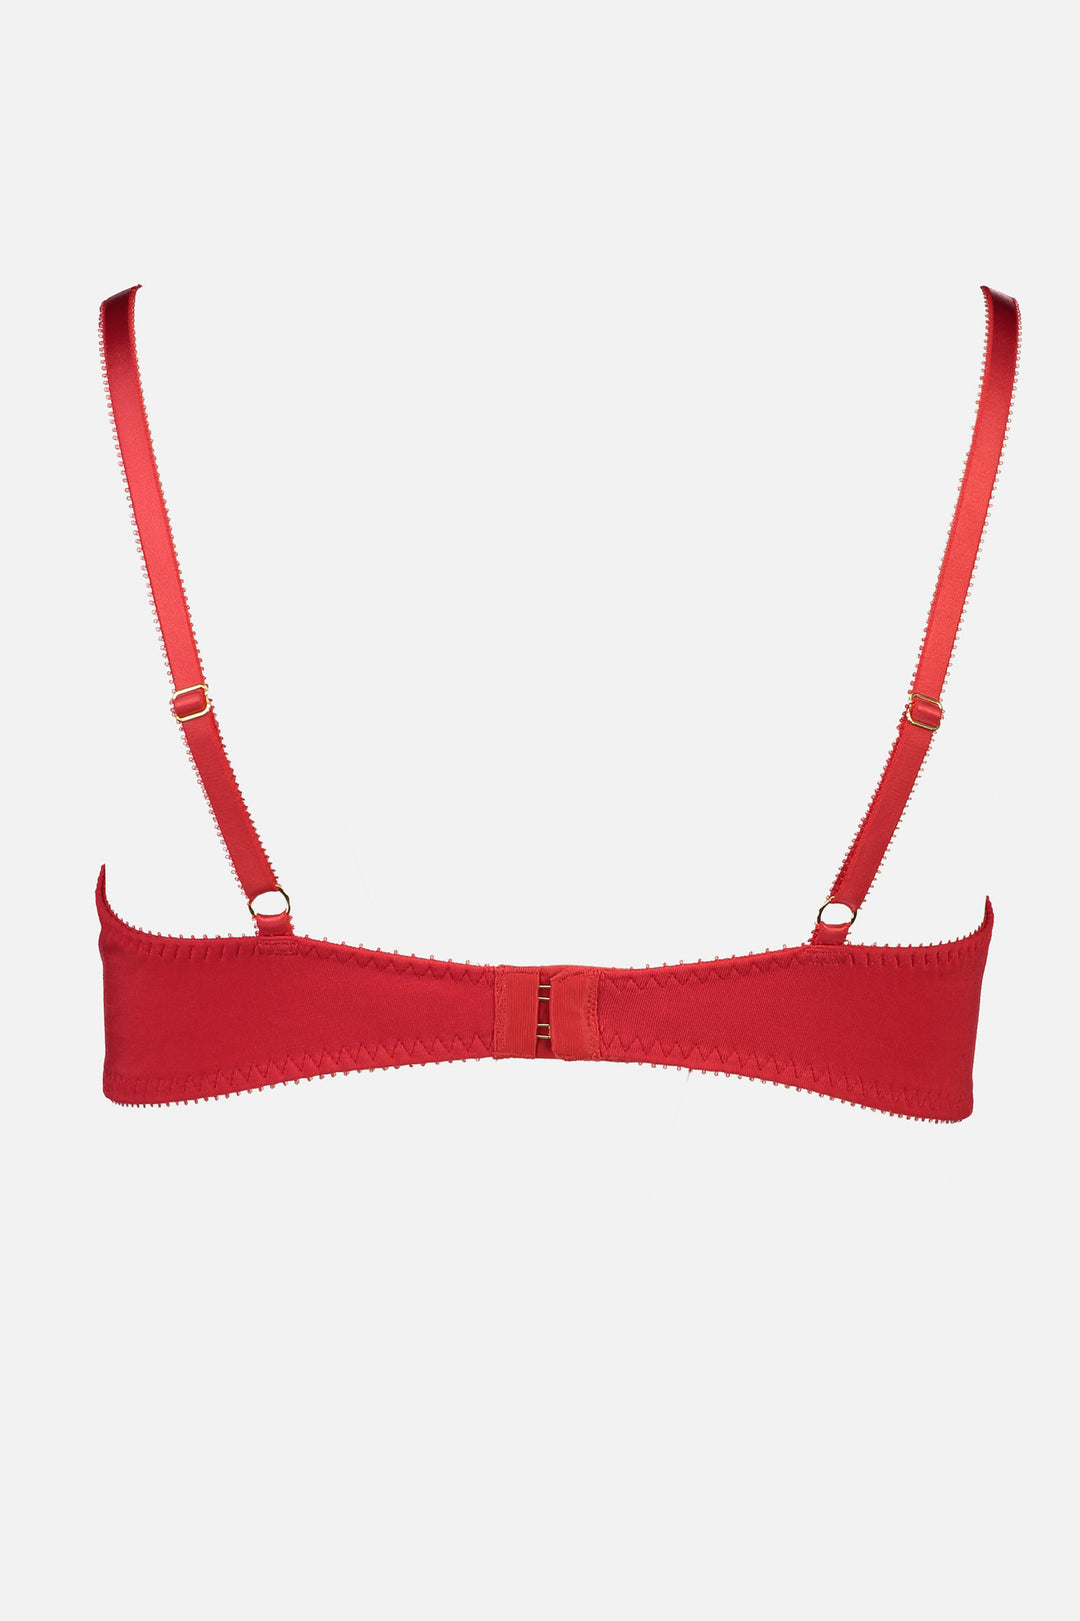 Videris Lingerie Angela underwire free soft cup bra in red TENCEL™ features adjustable back straps and back closure